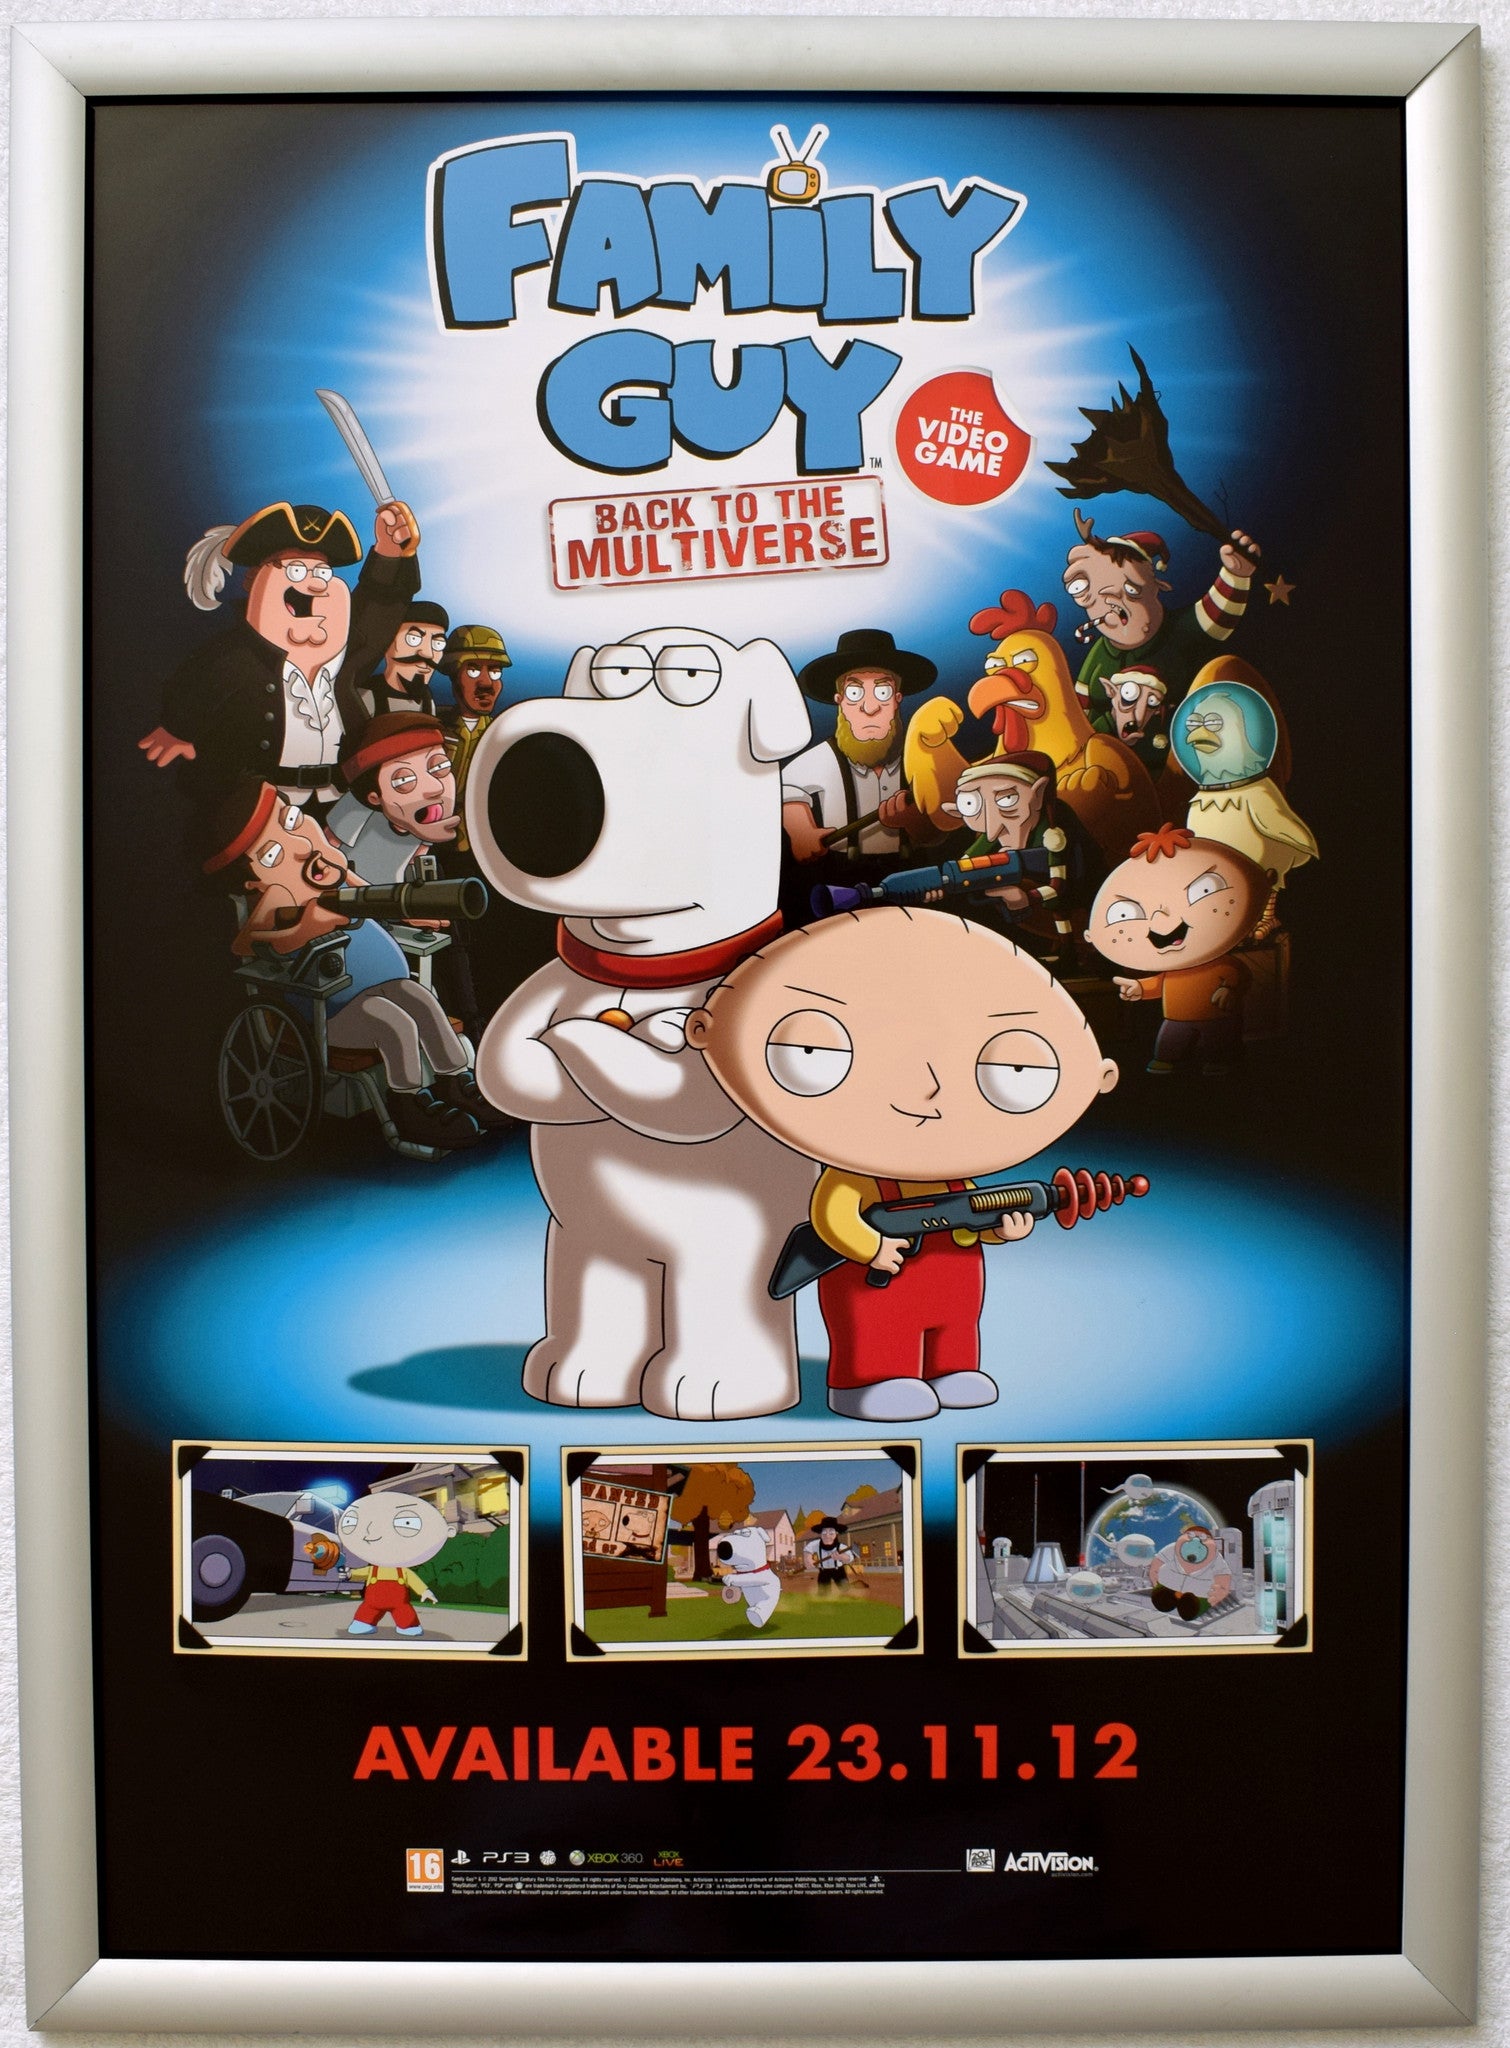 Family Guy Back to the Multiverse (A2) Promotional Poster #1